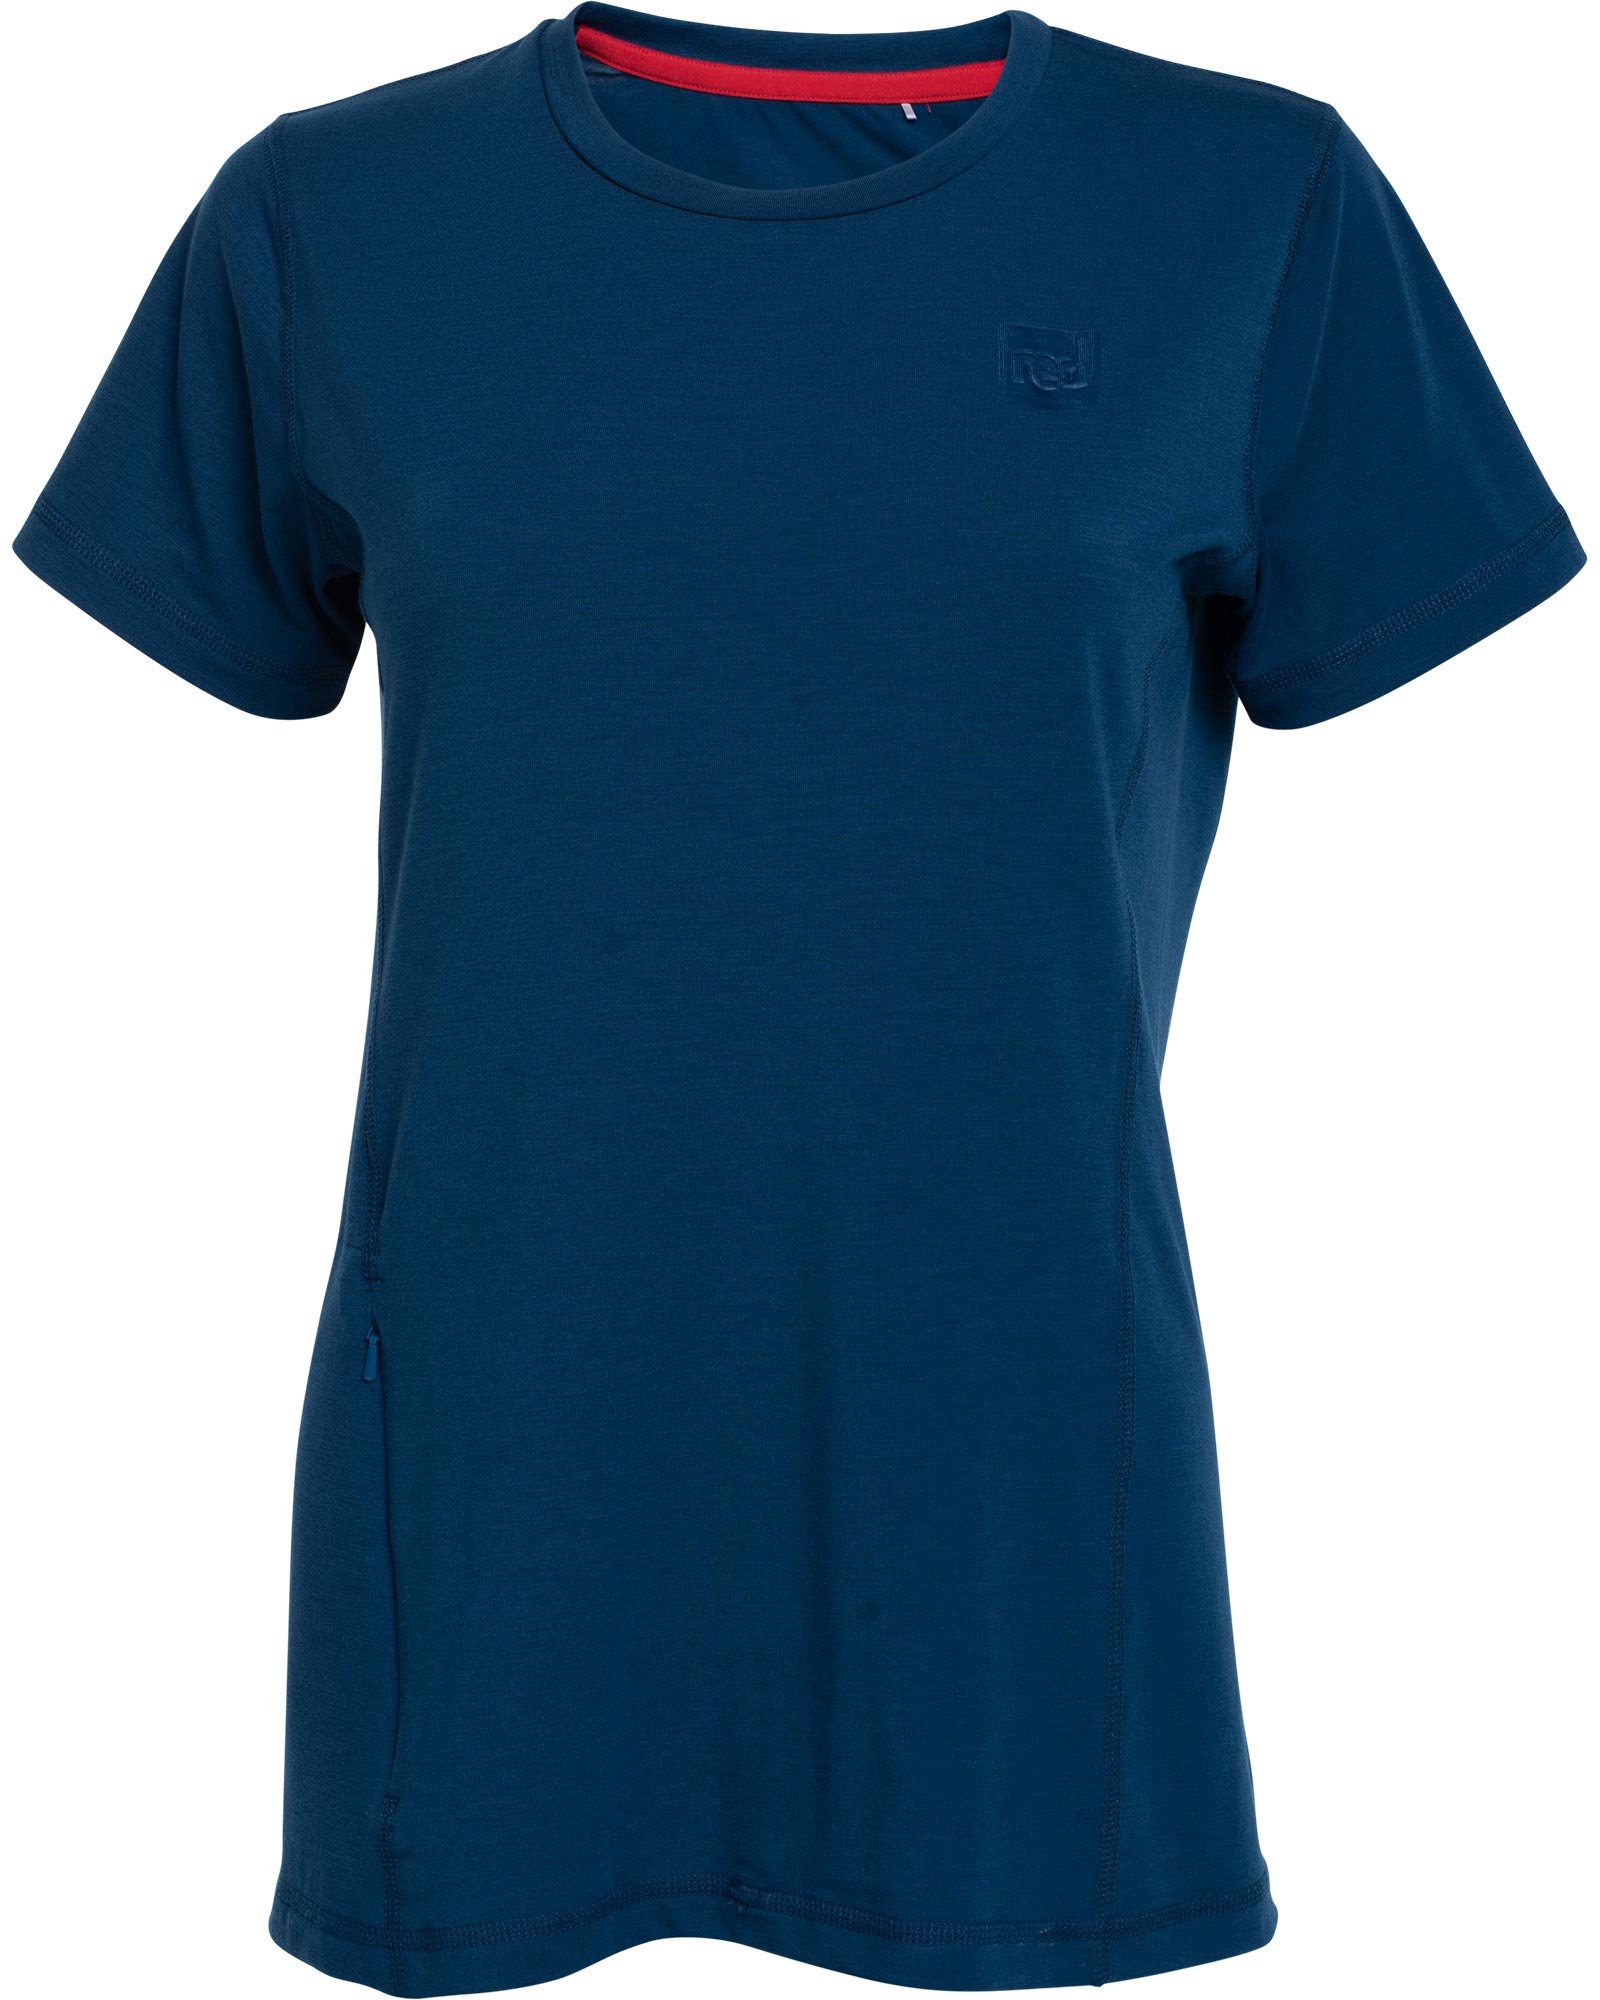 Product image of Red Paddle Co Performance Women's T-Shirt